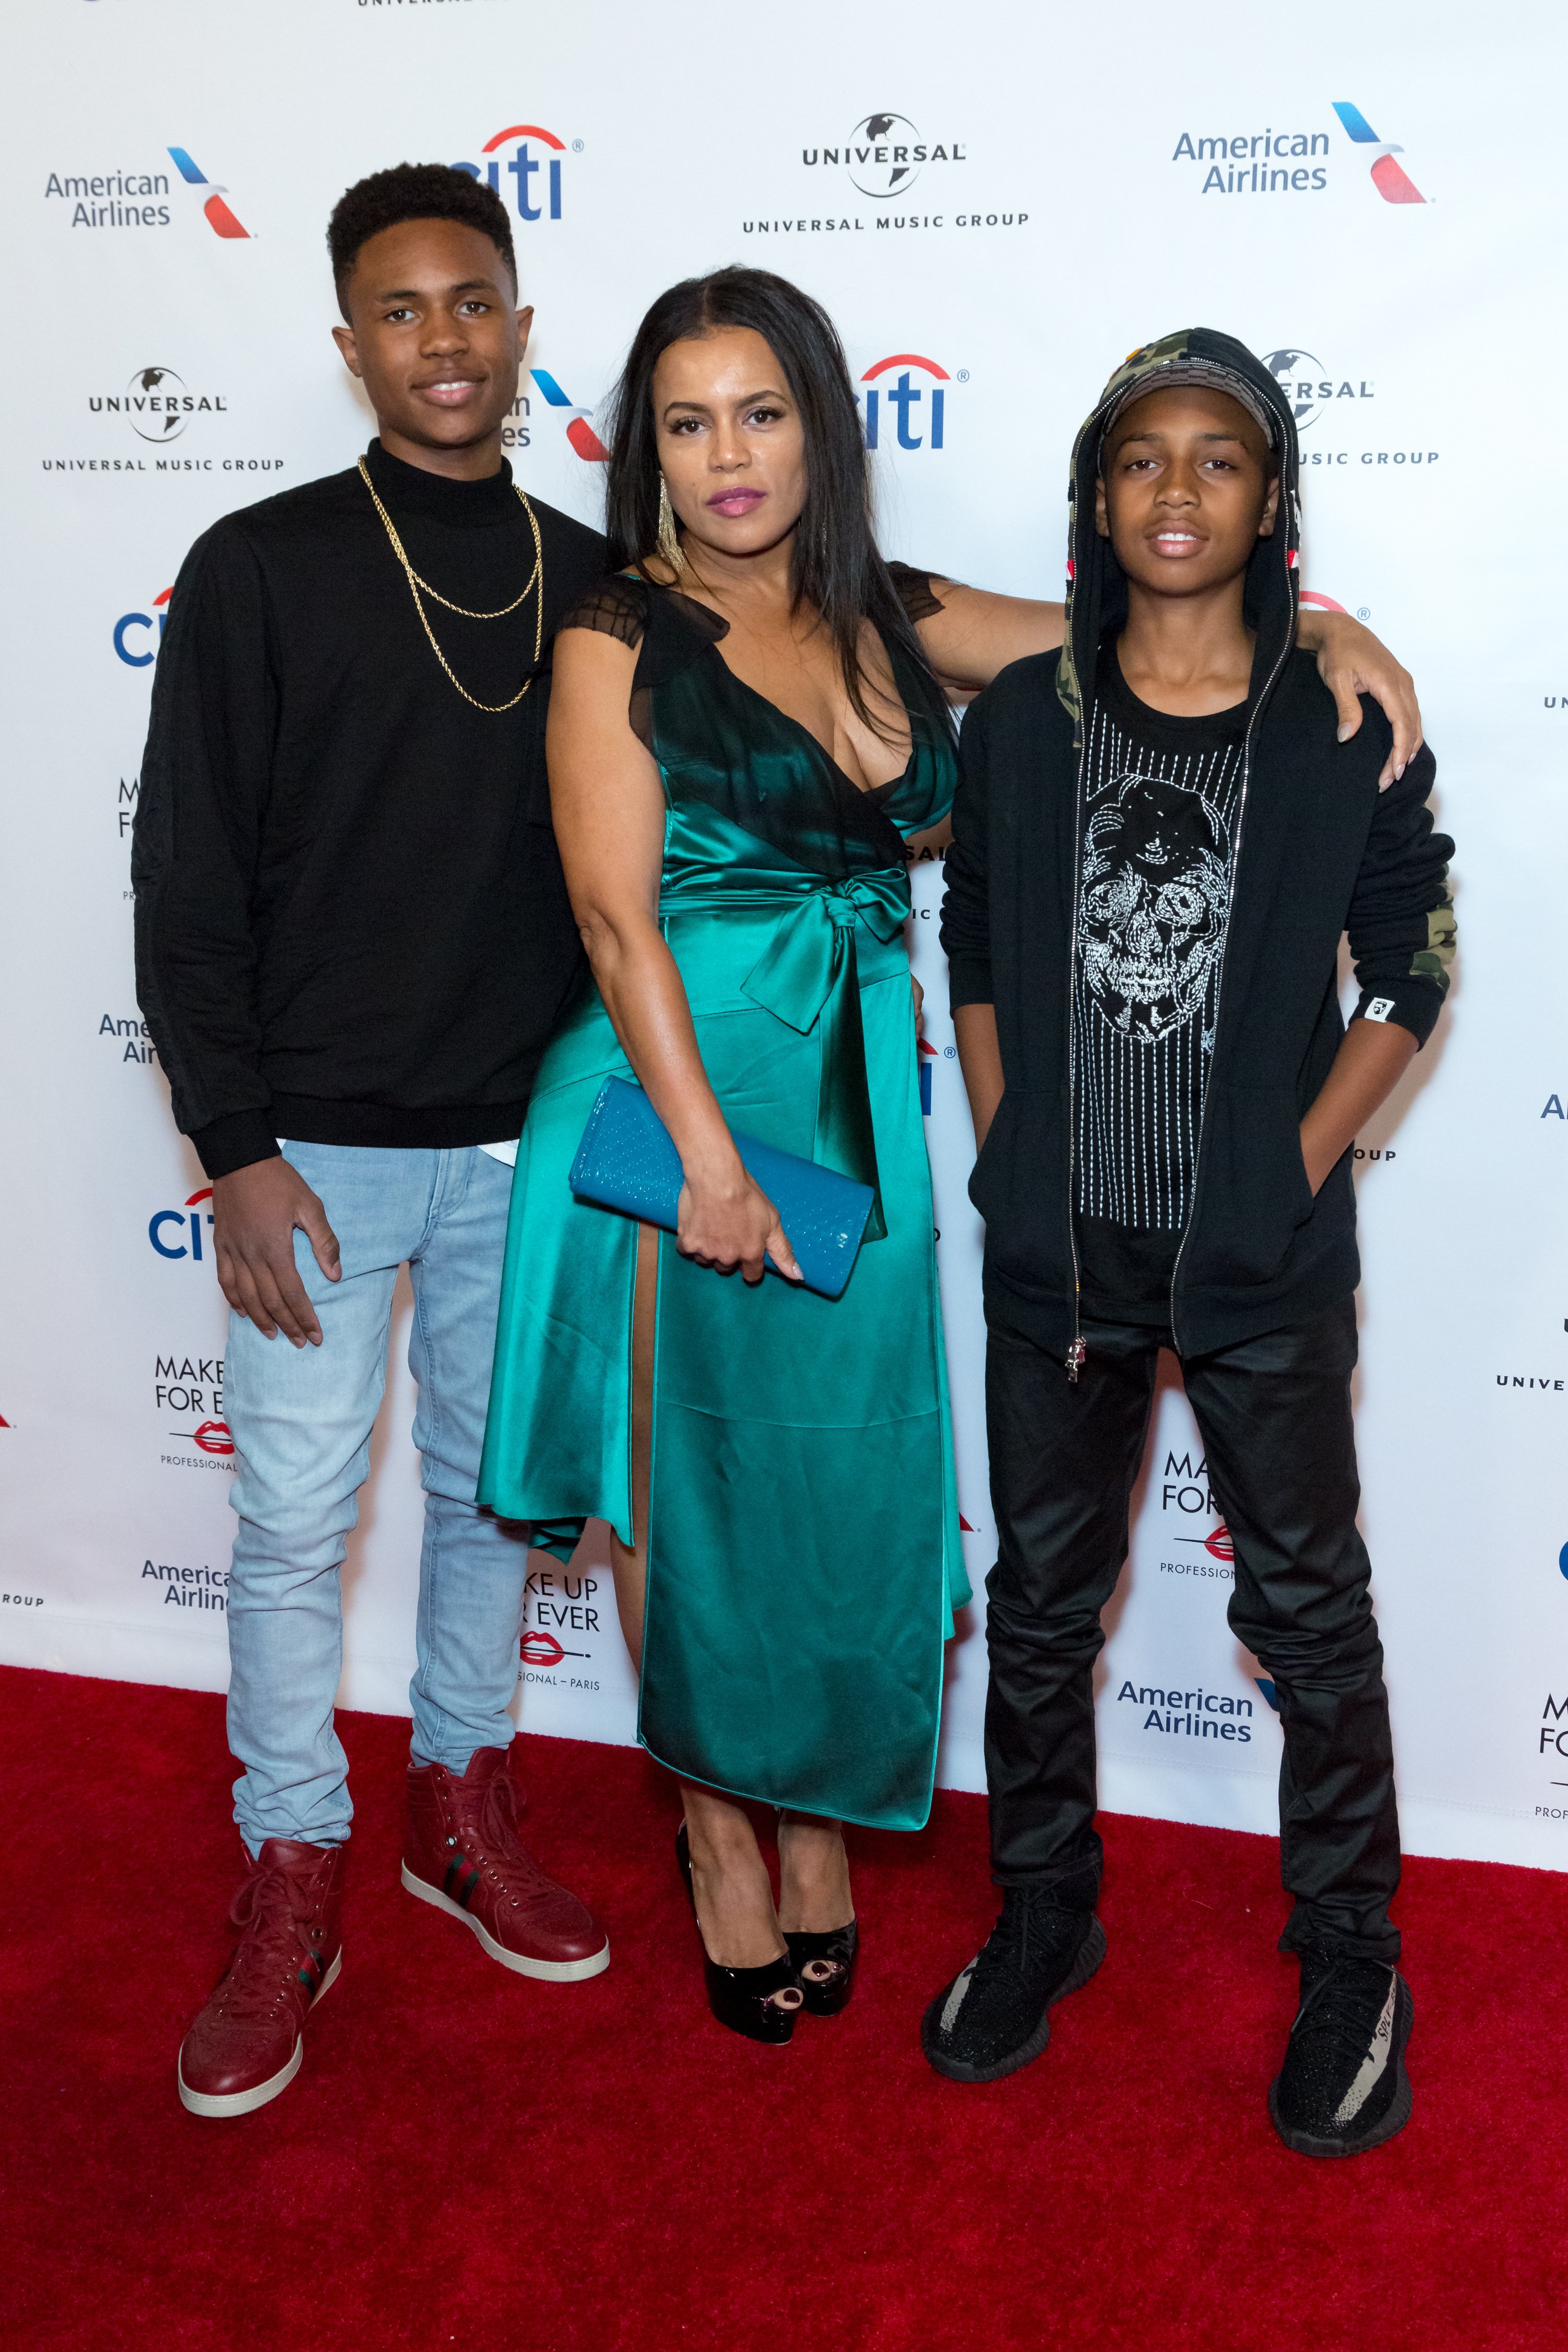 Kailand, Aisha and Mumtaz Morris at The Theatre at Ace Hotel on February 12, 2017 in Los Angeles, California.